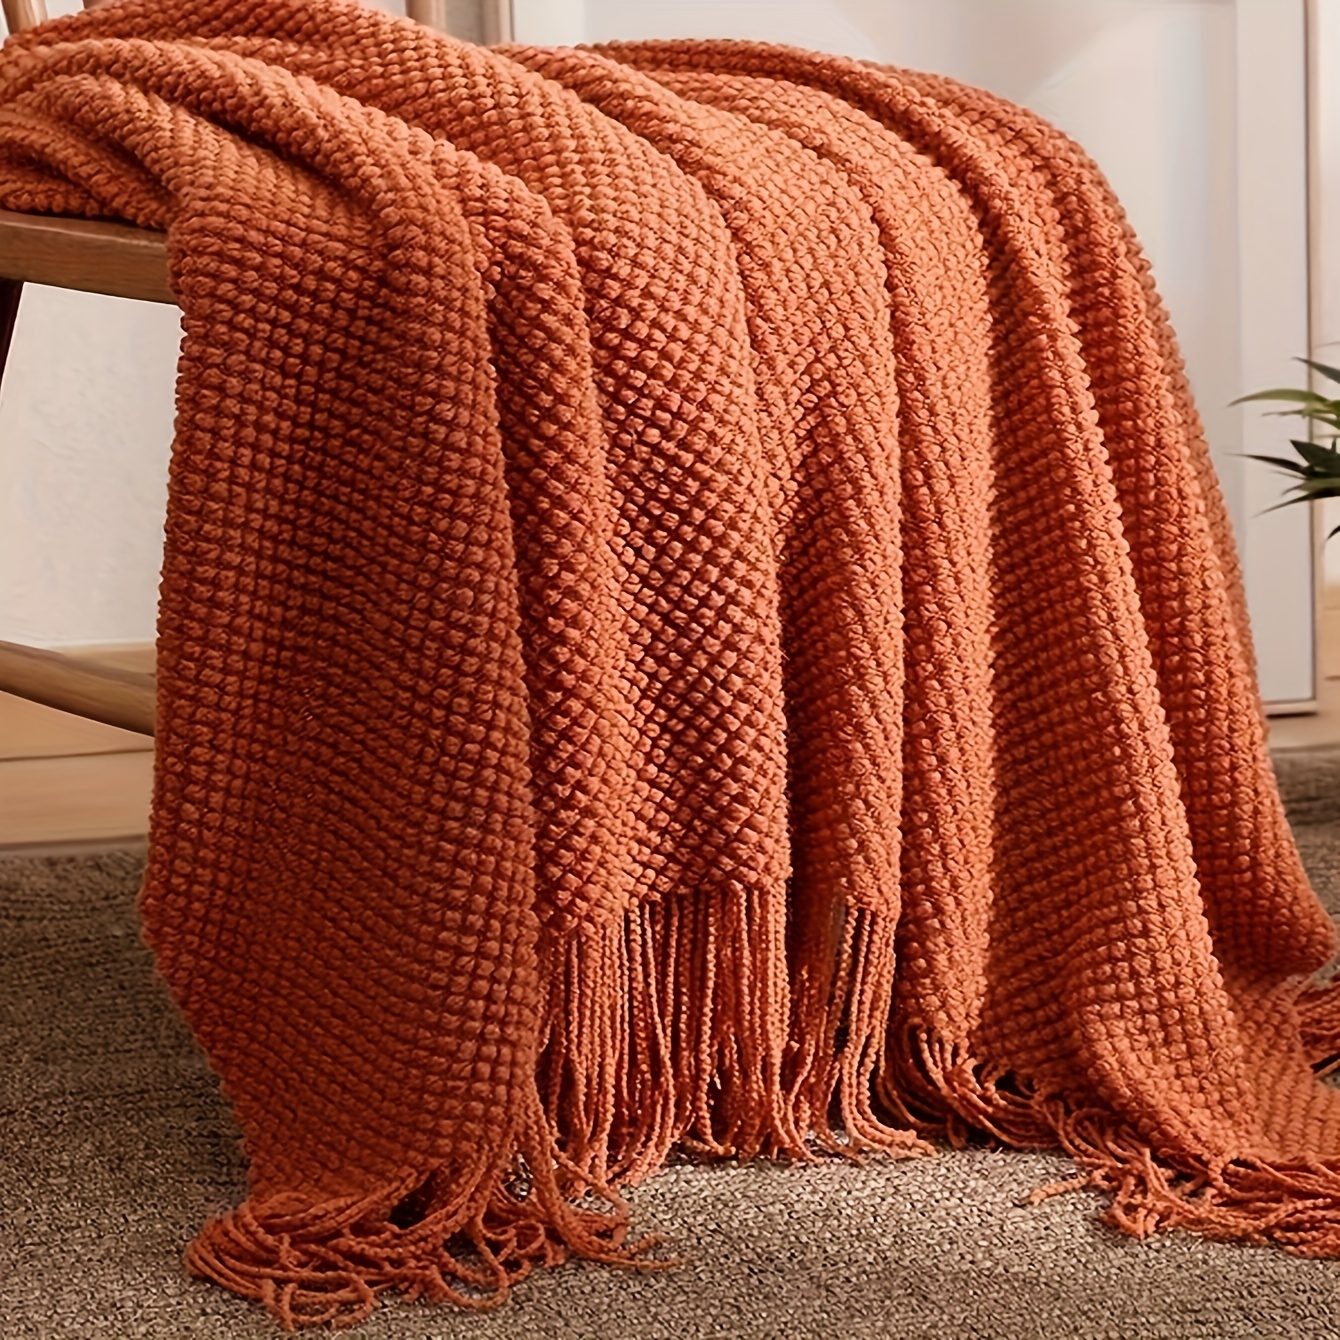 

1pc Orange Tassel Knitted Blanket, Warm Soft Throw Blanket For Couch Bed Sofa Office Camping